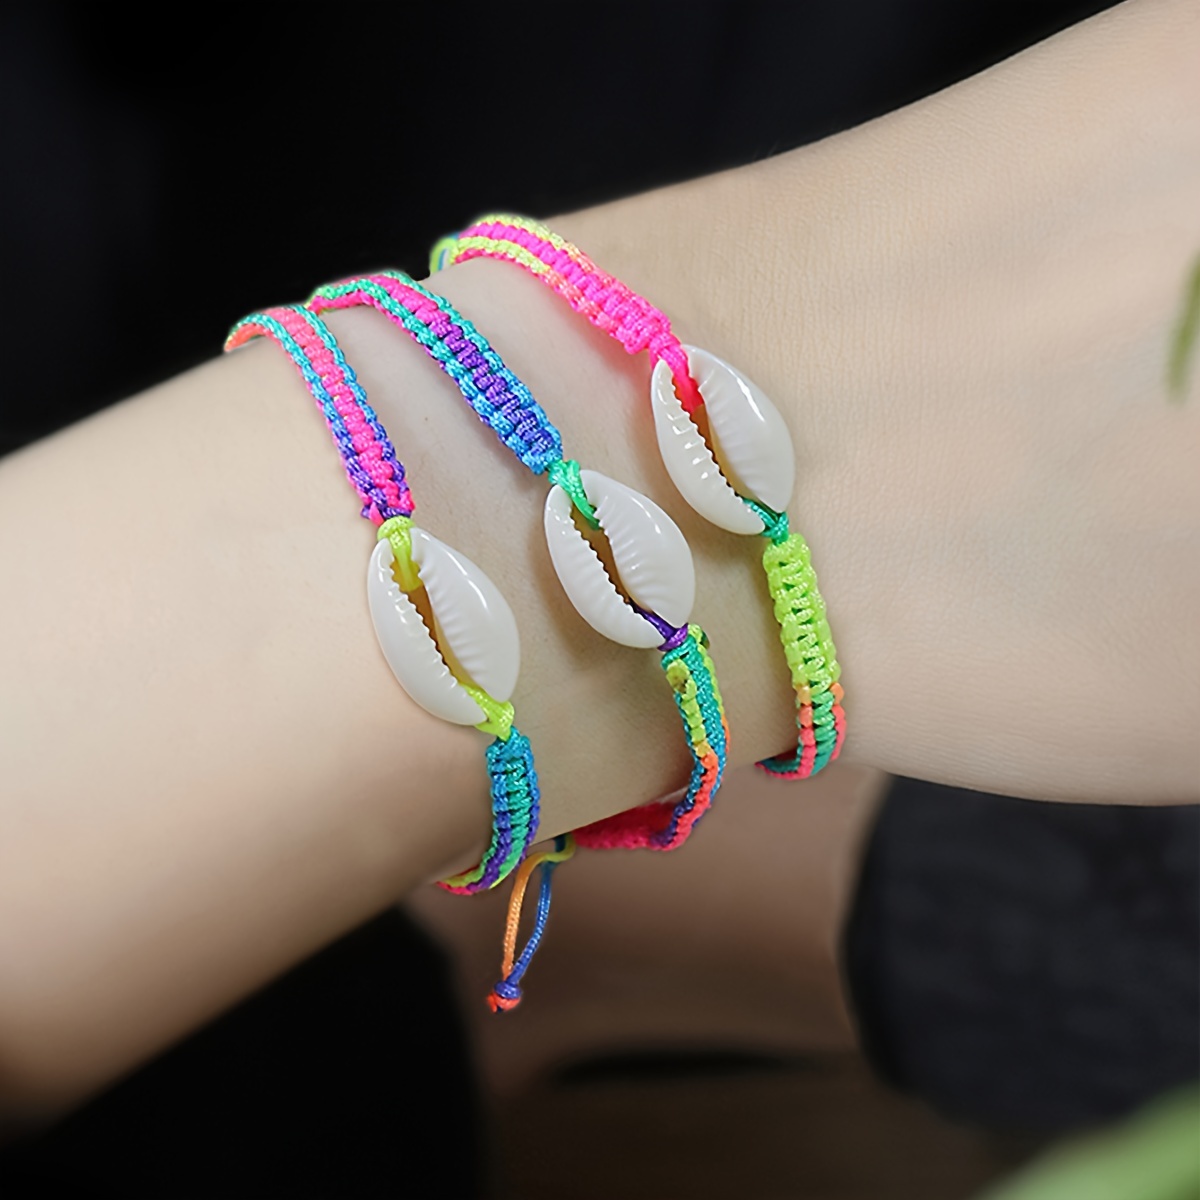 

3pcs Boho Vacation Ocean Style Hand Rope Multi Piece Colorful Handwoven String Bracelet, Natural Shell Adjustable Slider Bracelet Set Cute Beach Dress Up Travel Daily Wearing Hand Jewelry